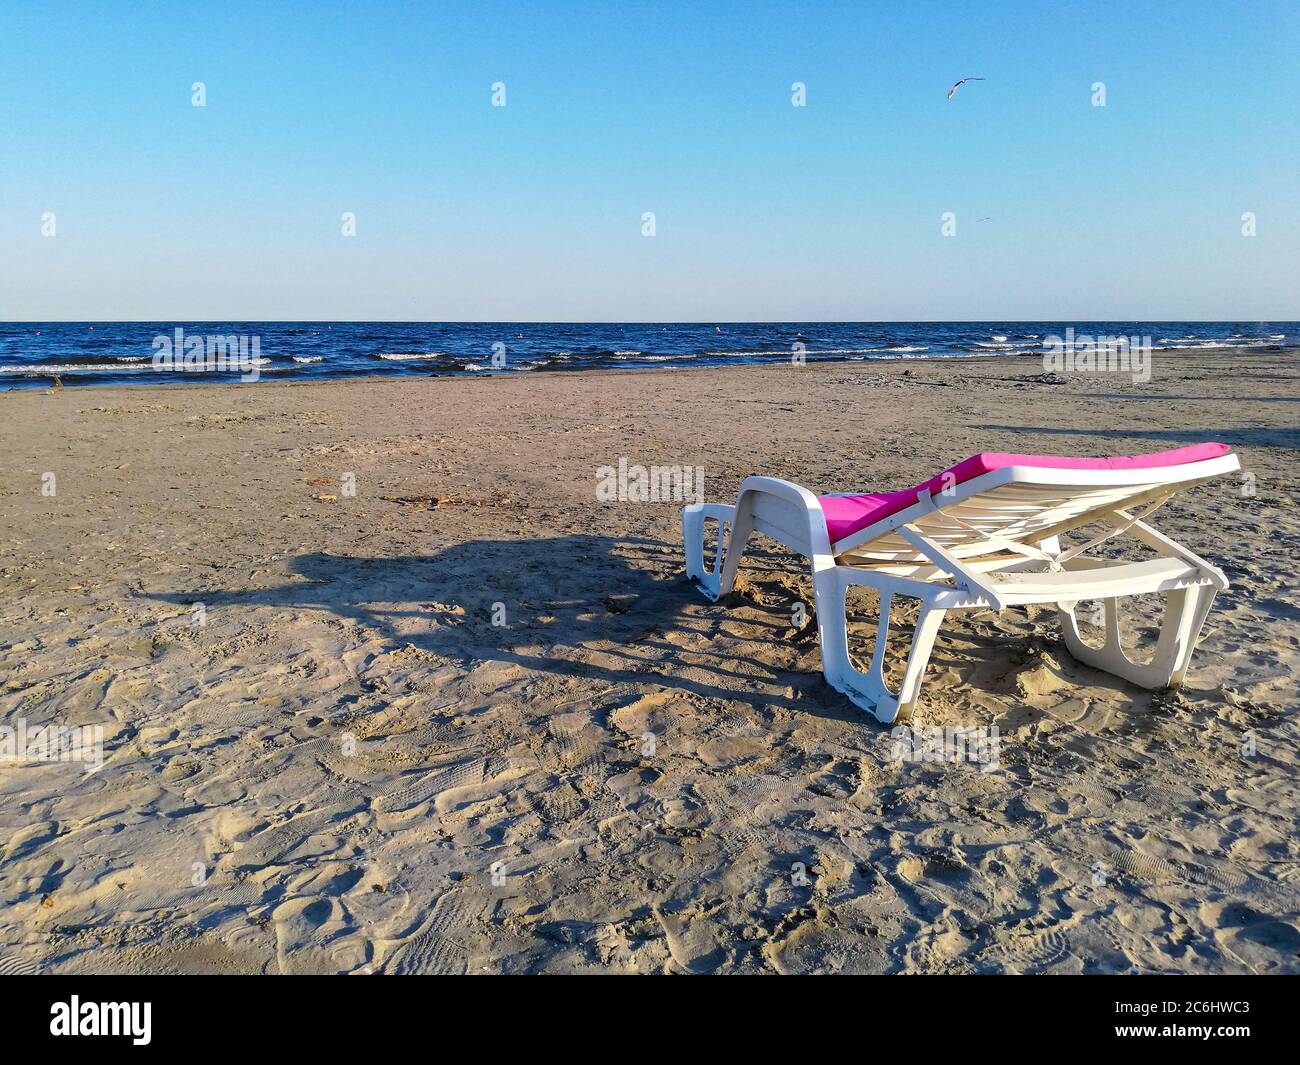 Sulina Beach - the most beautiful wild beach in civilized Romania. Tourists go there for the fine sand and beautiful scenery from the Danube to the Bl Stock Photo